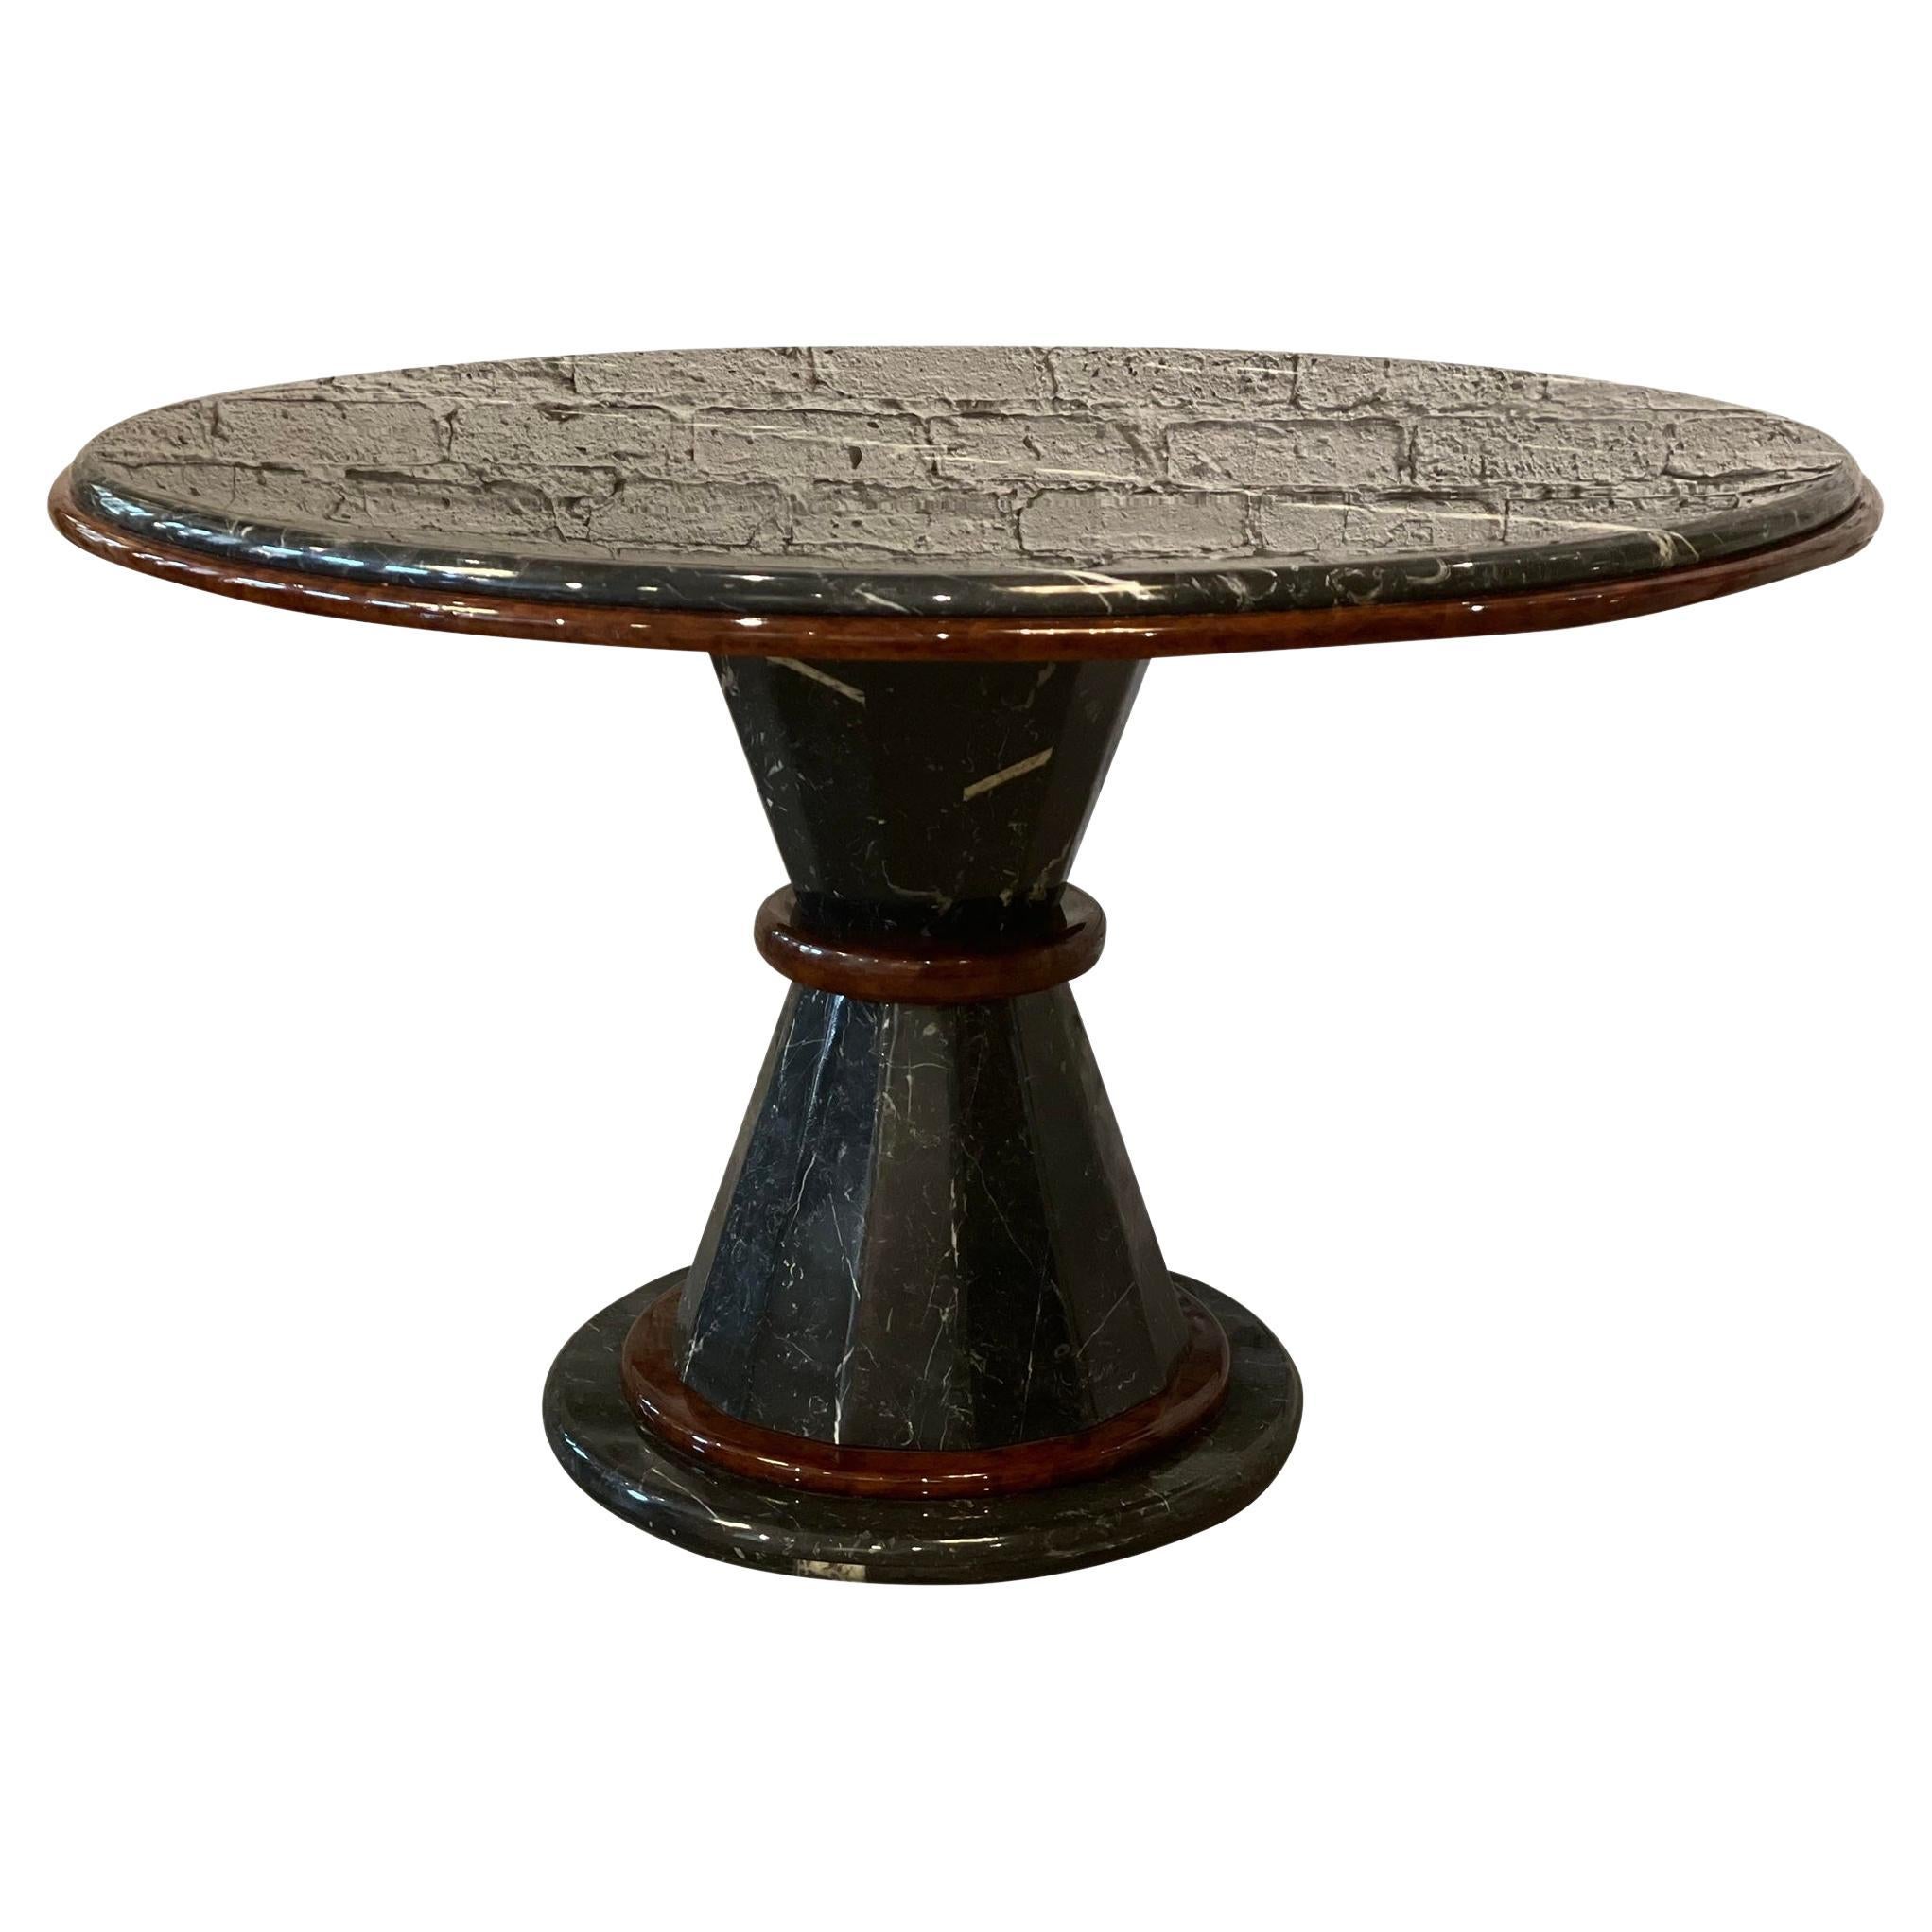 Postmodern Vintage Nero Marquina Black and White Marble Pedestal Dining Table